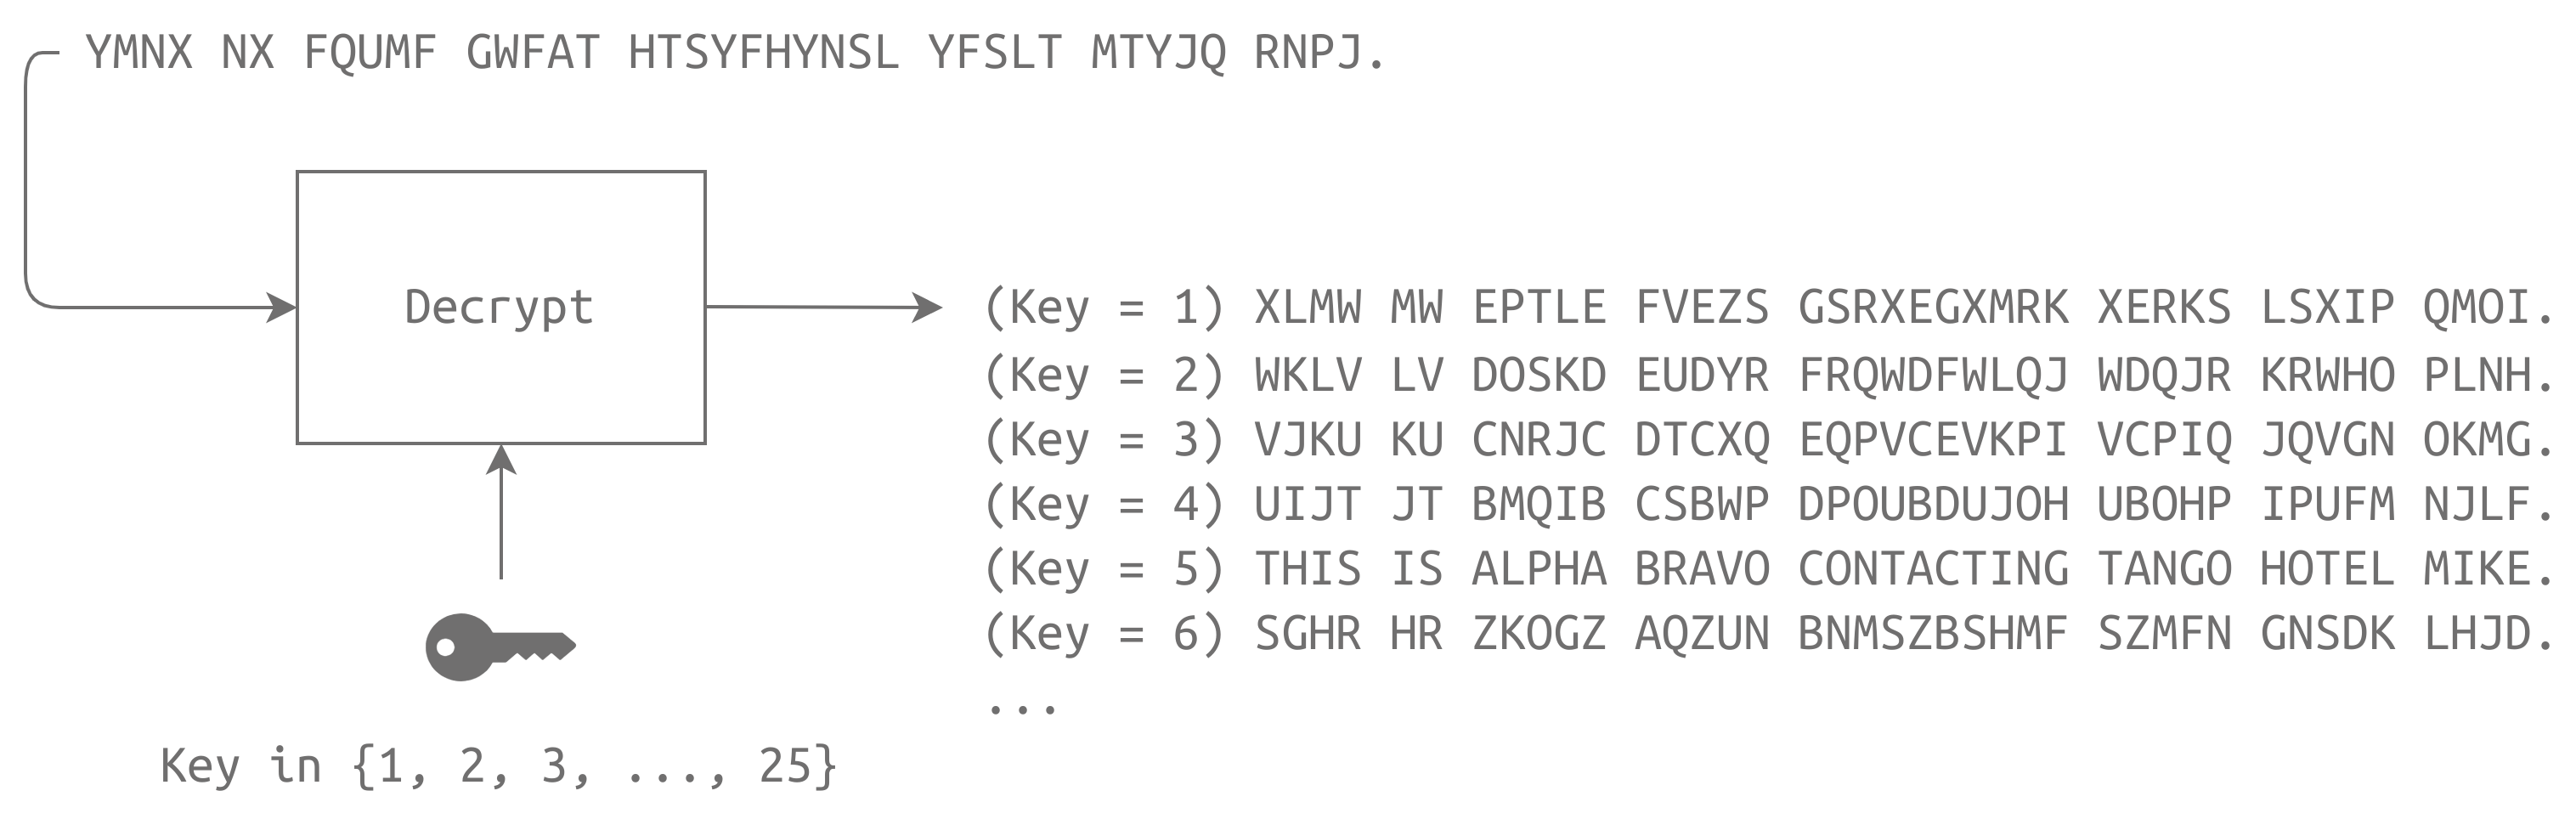 Decrypting a ciphertext by trying all possible keys, i.e., by brute force